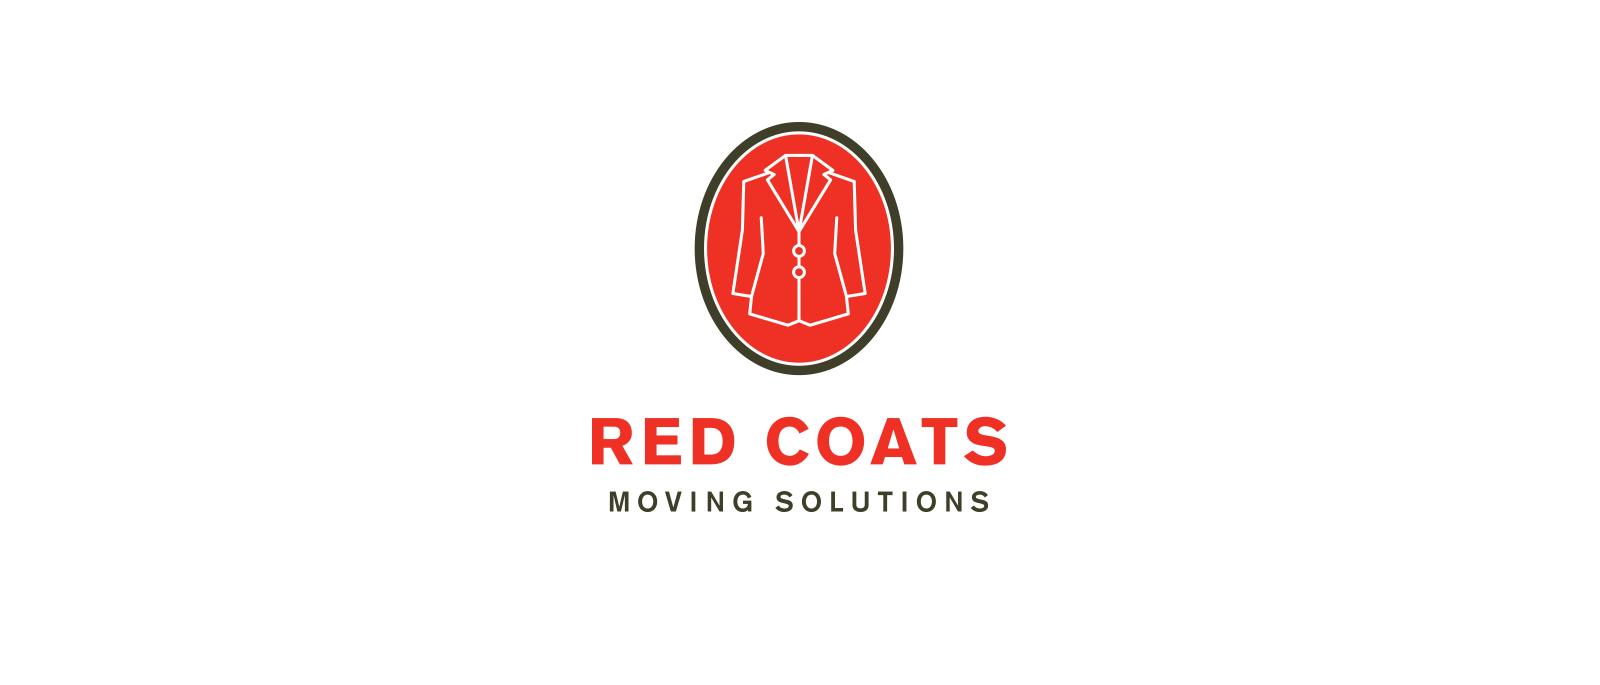 Red Coats Moving Solutions - Identity